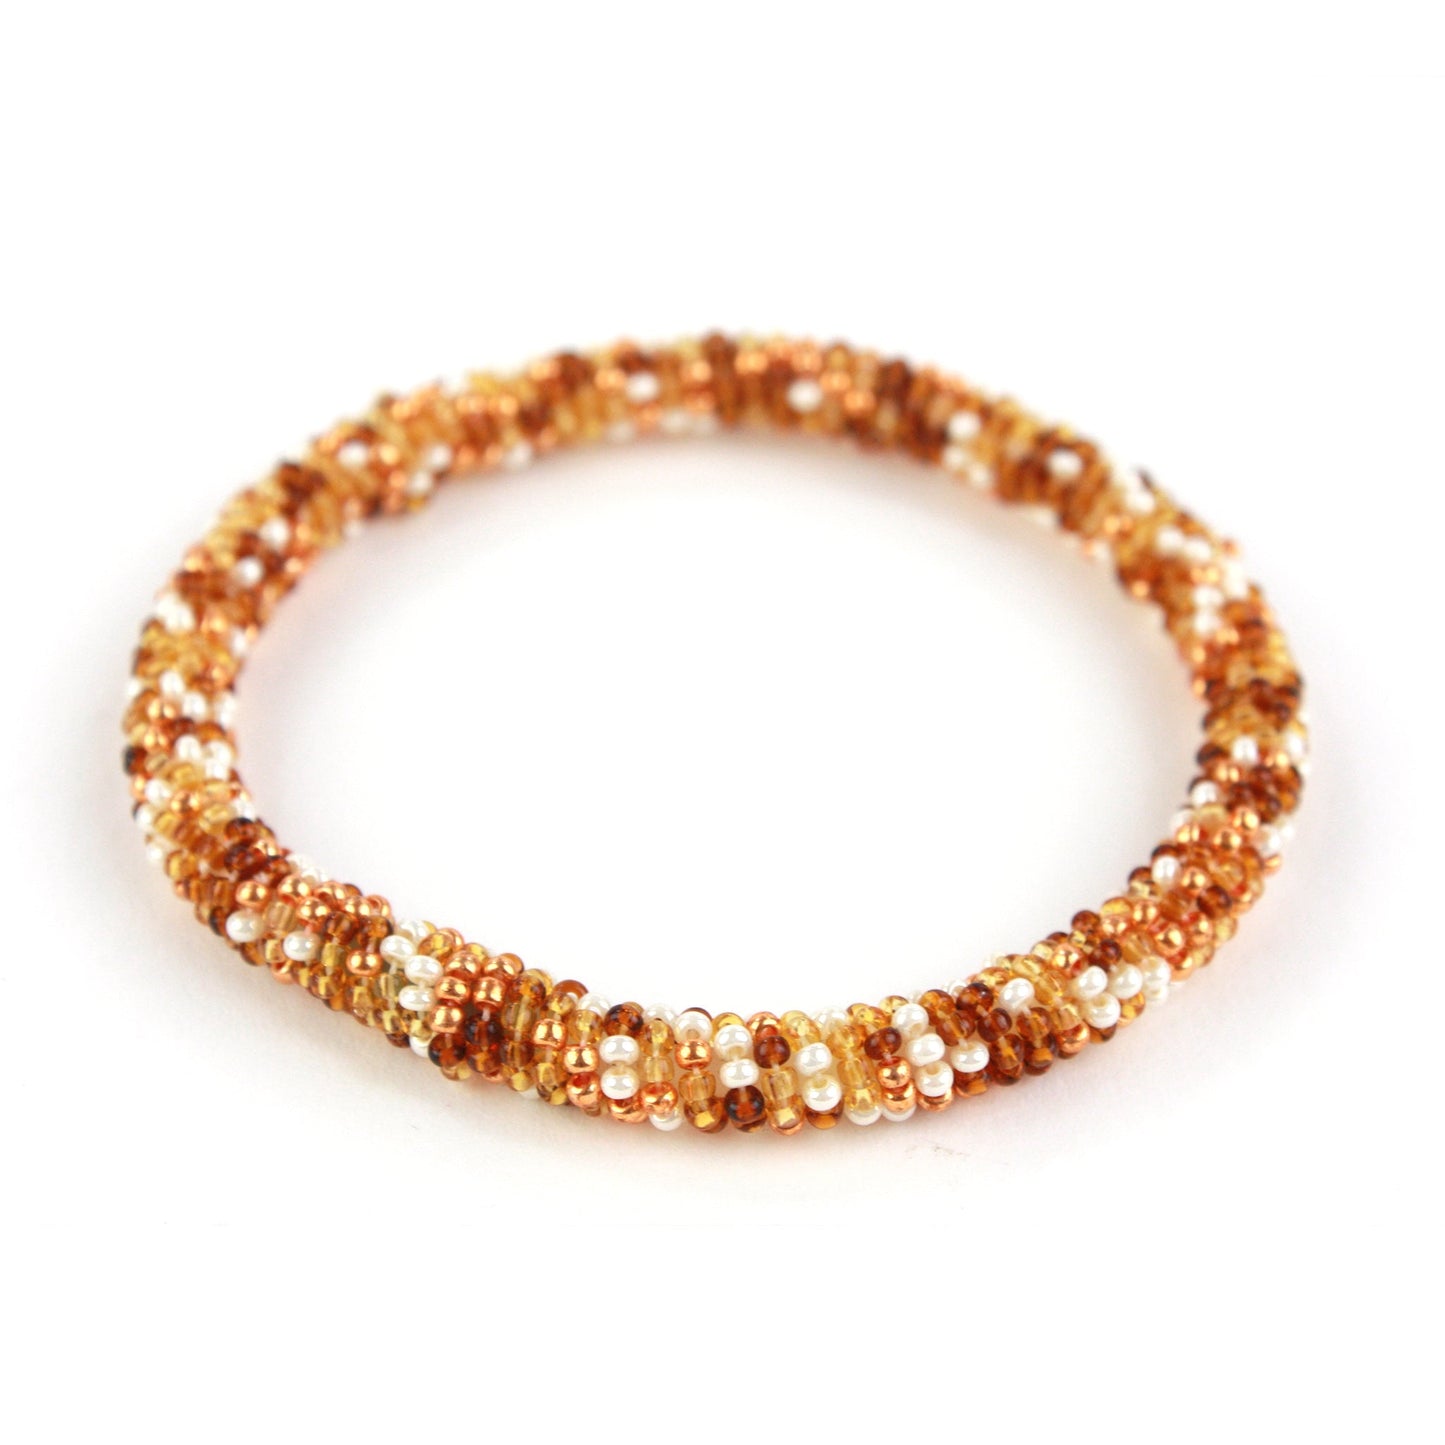 Happy bangle -amber, ivory and gold